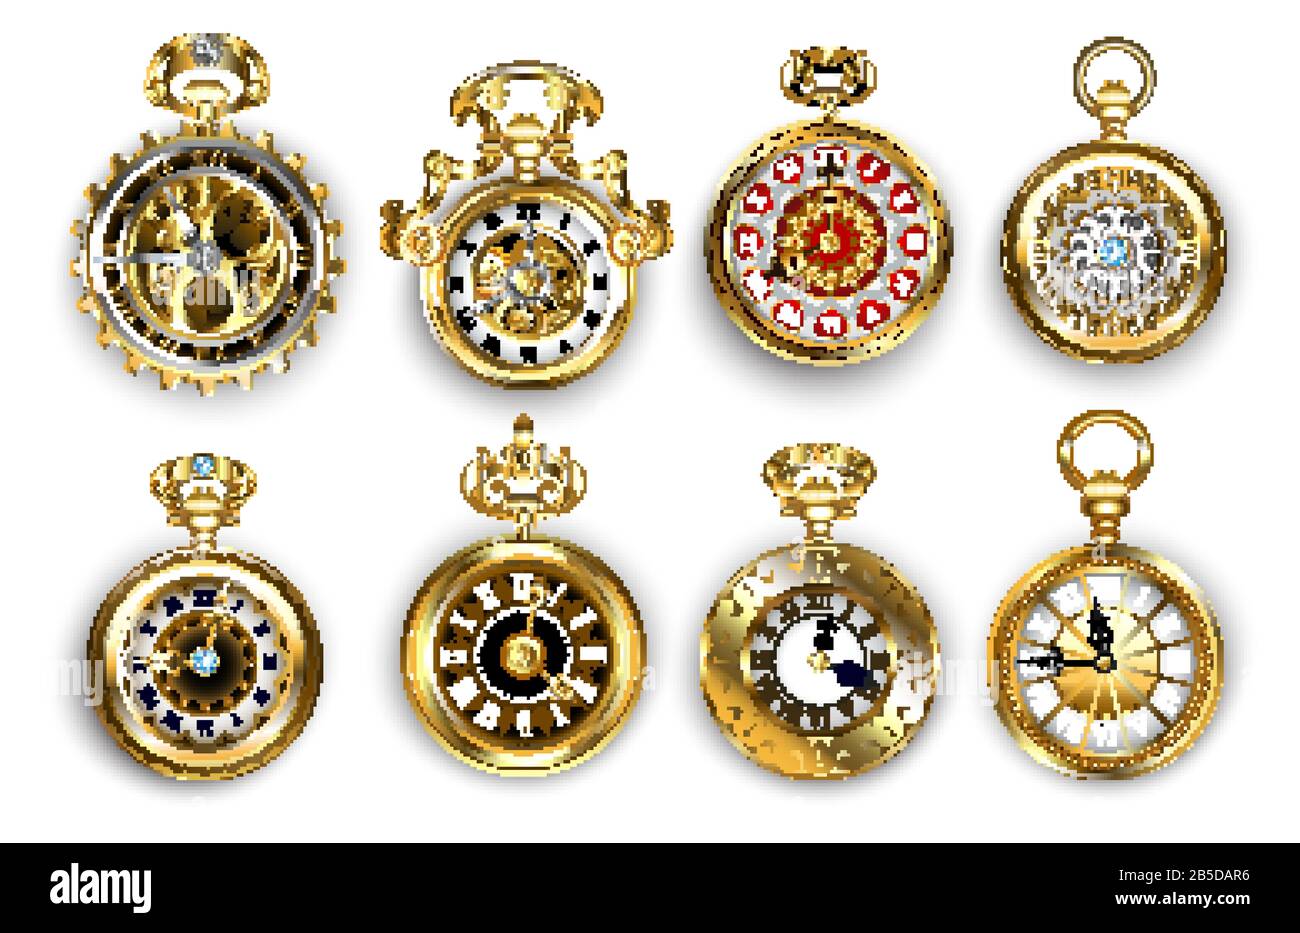 Set of old, jewelry, antique, gold watches, decorated with pattern and brass gears on white background. Steampunk style. Vintage pocket watch. Stock Vector